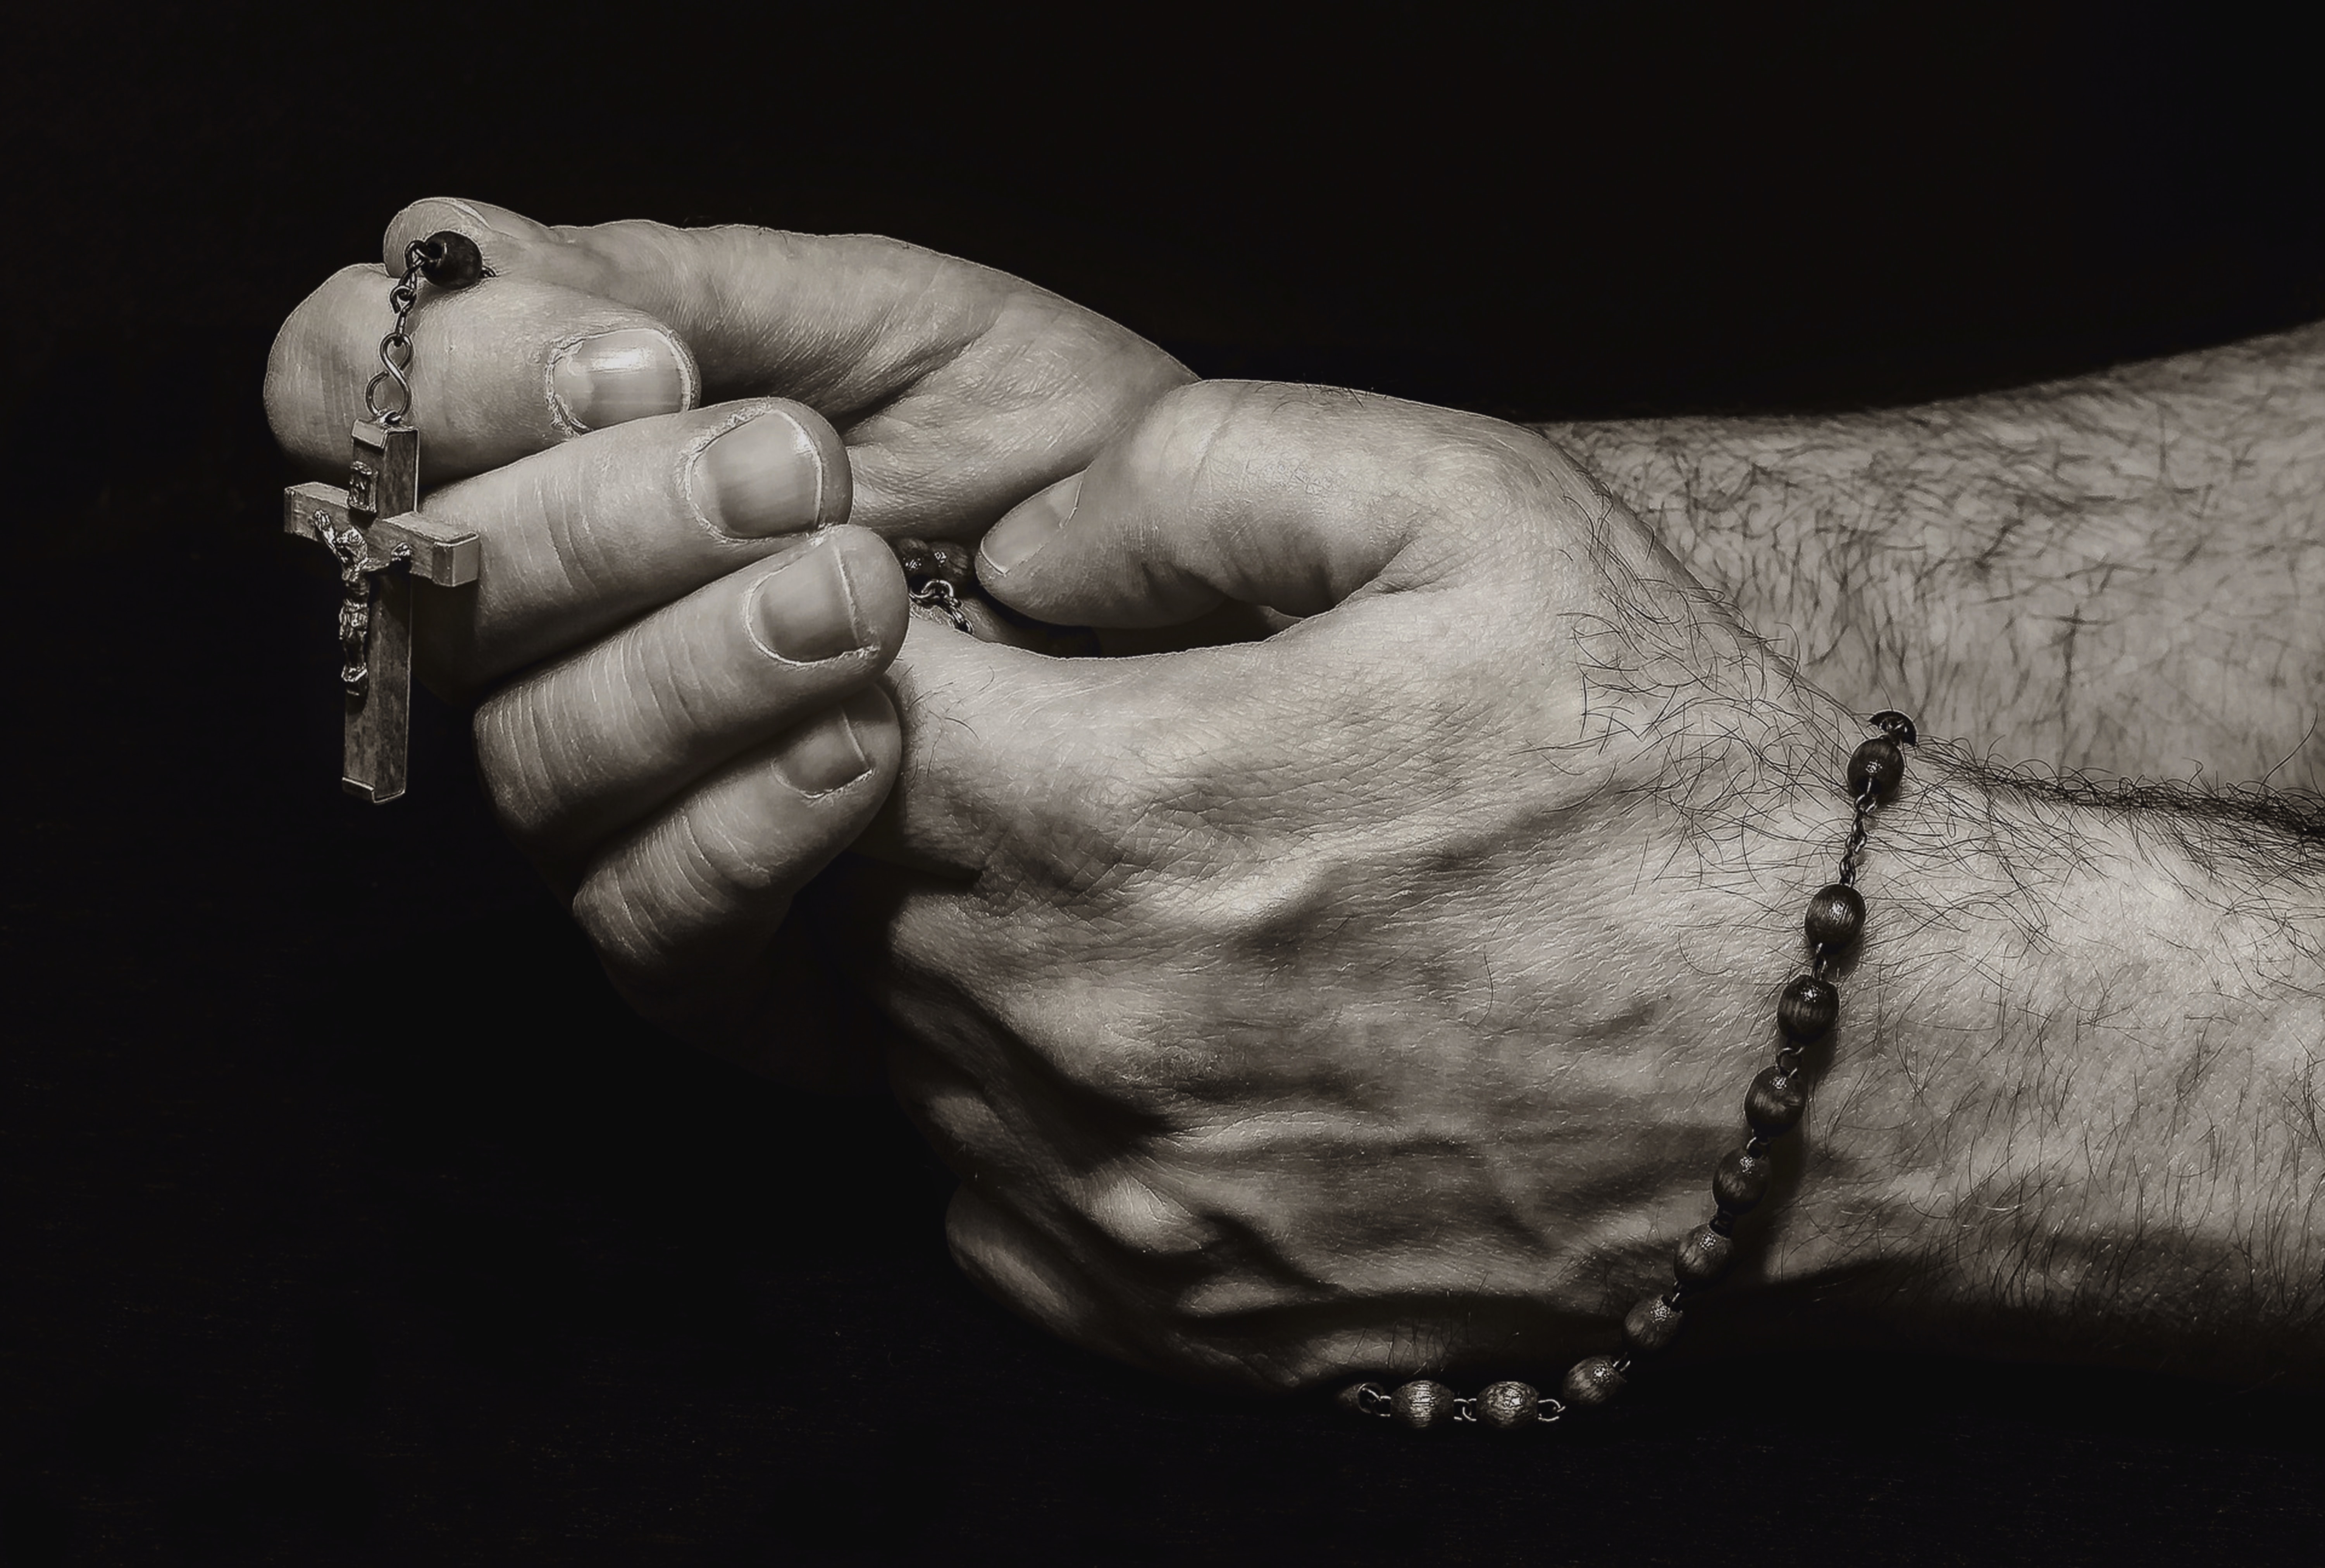 rosary on hand sephia photo by Myriam Zilles